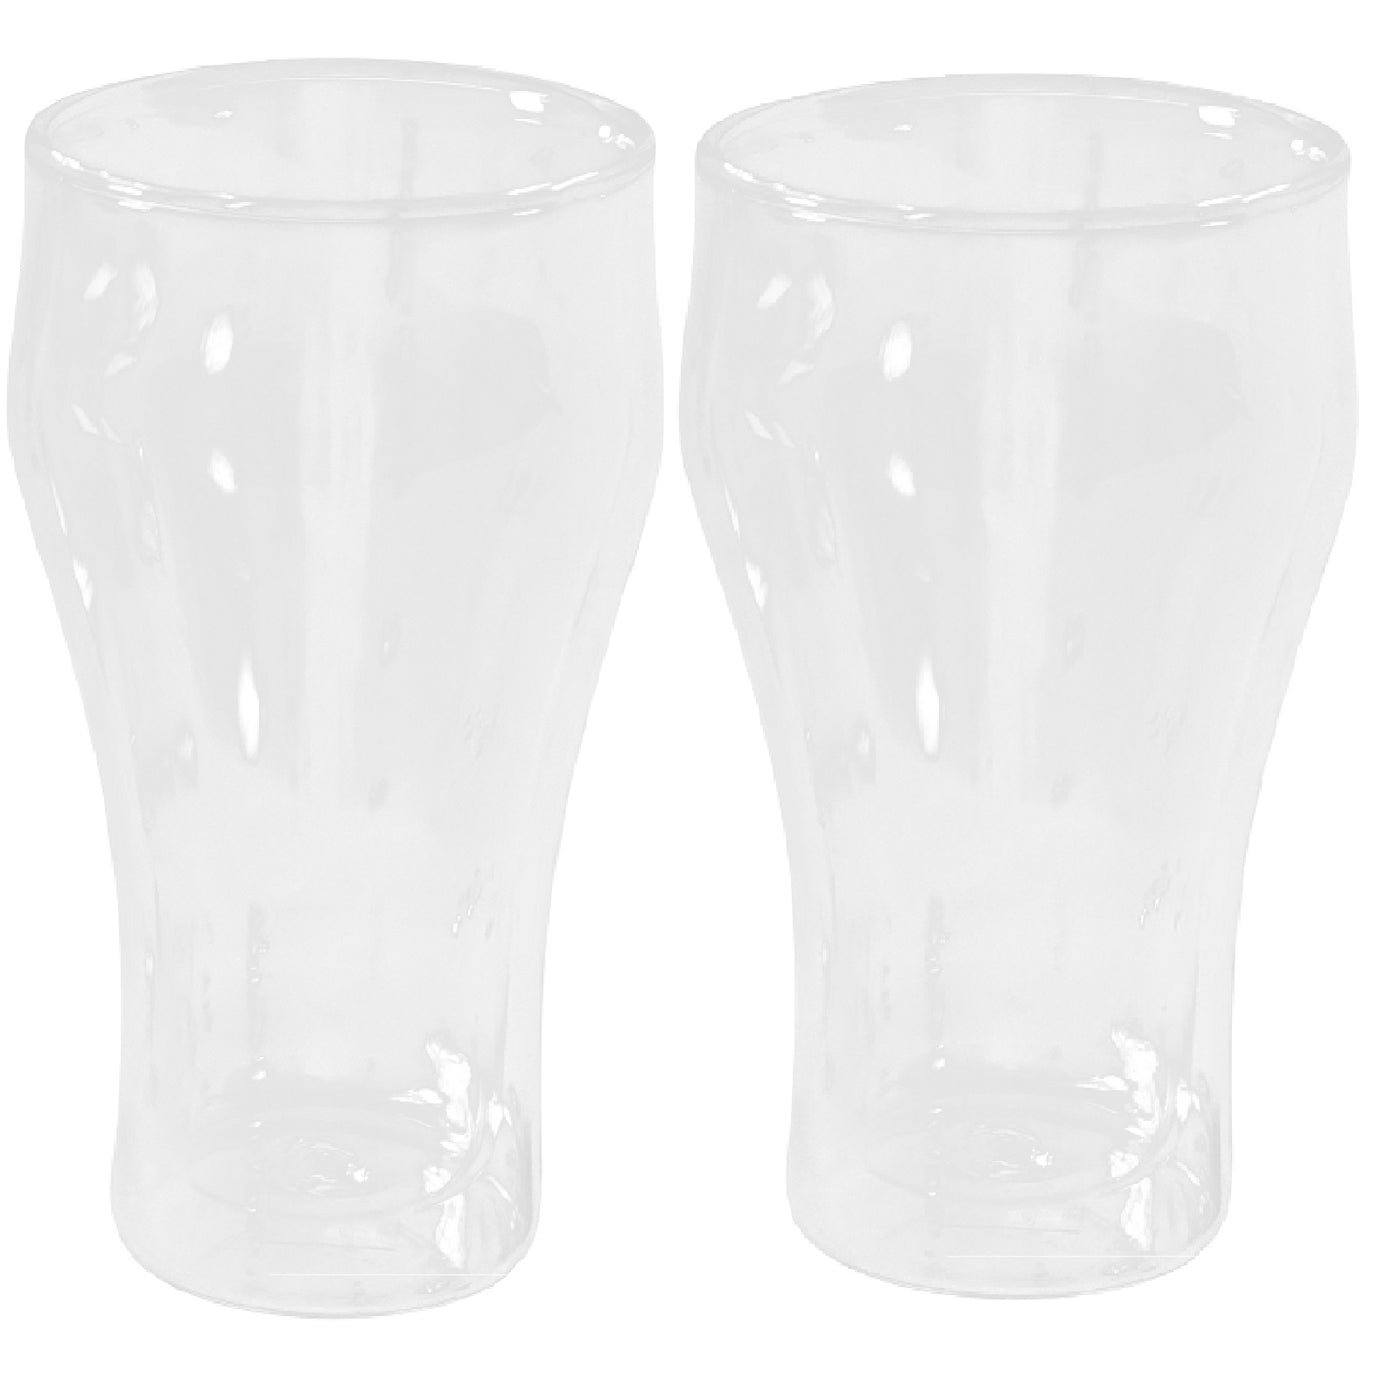 Set of 2 Clear Highball Drinking Glasses Kitchen Glassware Perfect for Party and Gifts for Men and Women